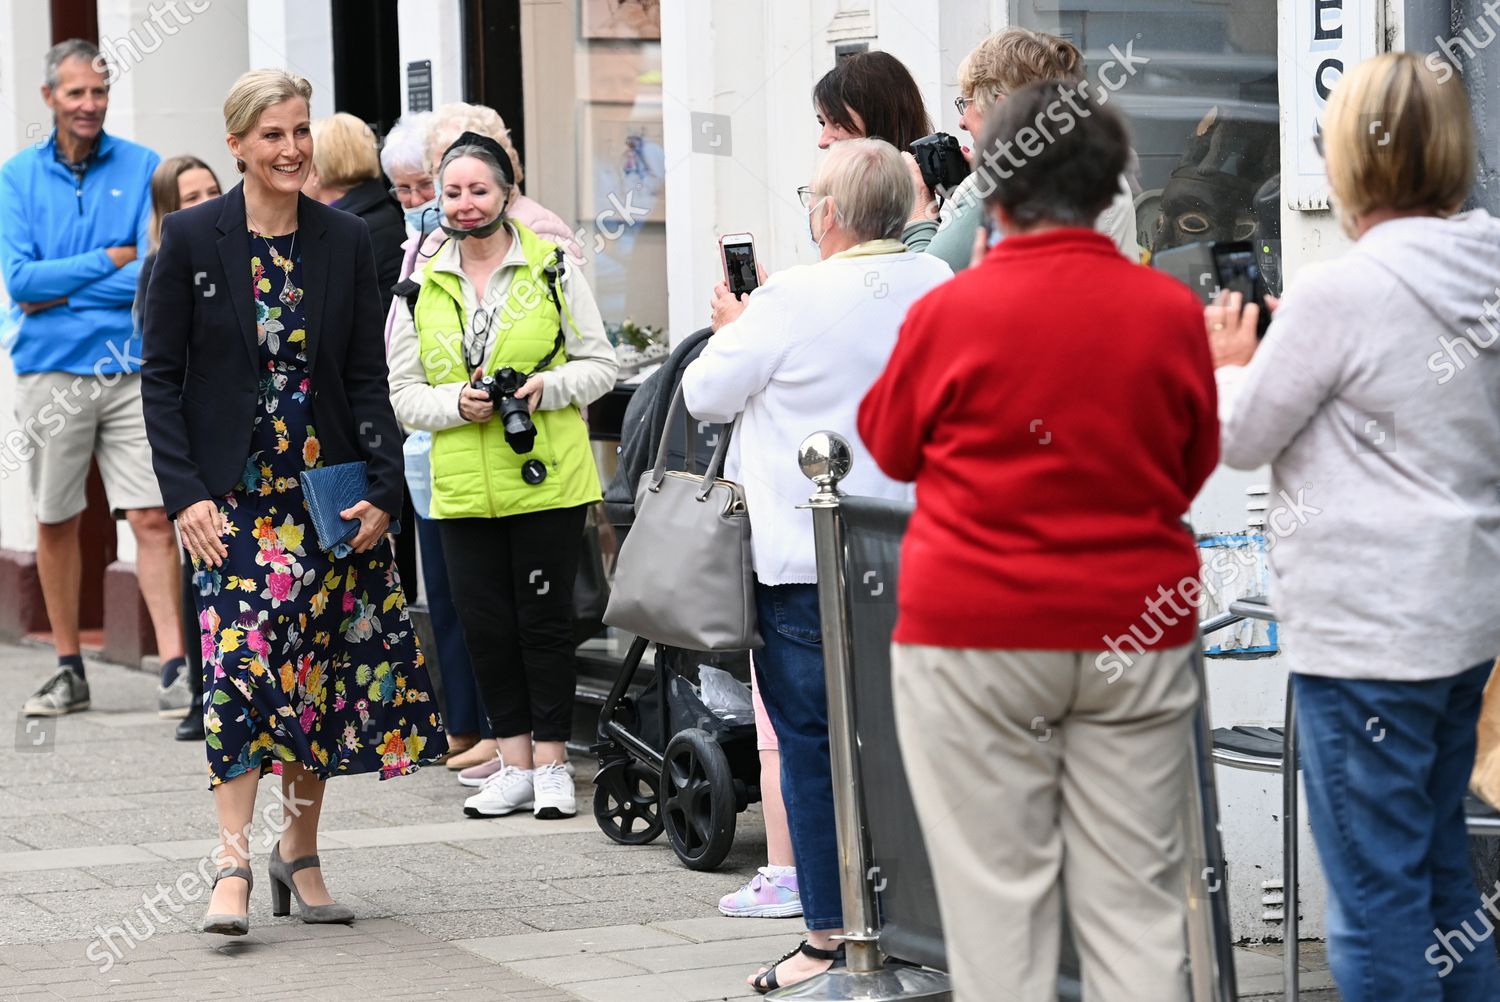 prince-edward-and-sophie-countess-of-wessex-visit-to-s-mart-angus-forfar-scotland-uk-shutterstock-editorial-12172314d.jpg